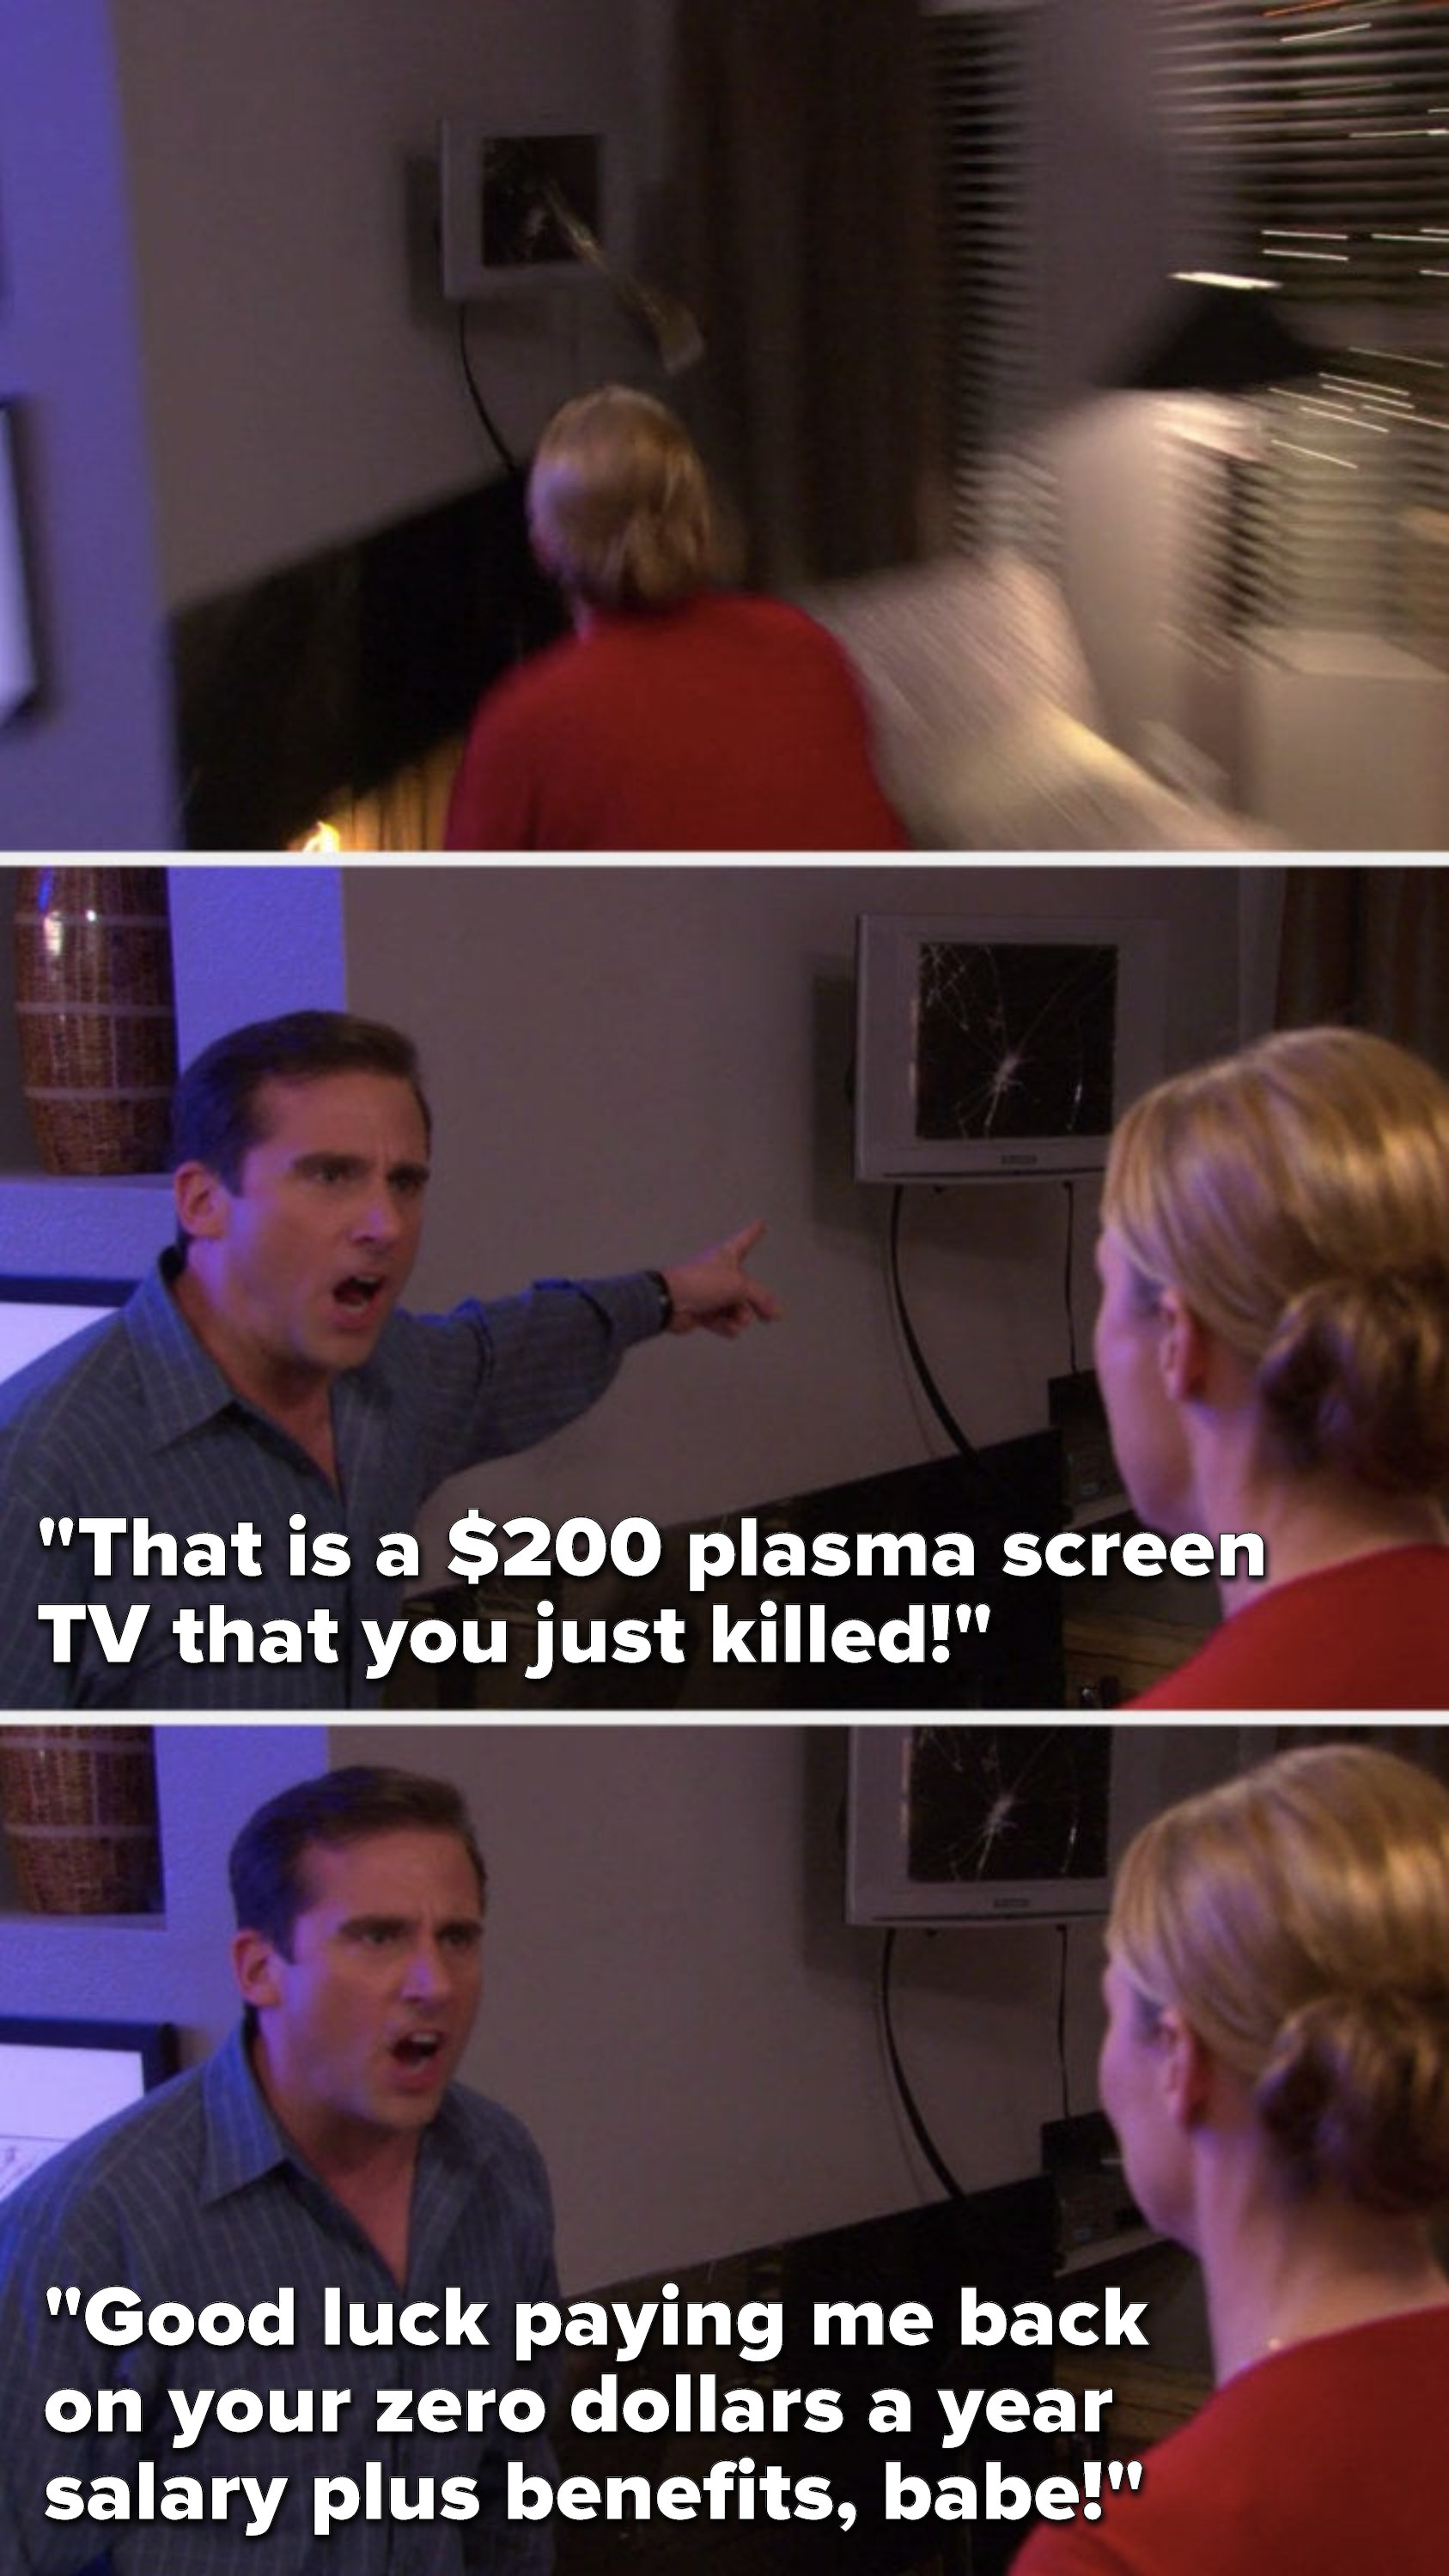 Michael says, &quot;That is a $200 plasma screen TV that you just killed, good luck paying me back on your zero dollars a year salary plus benefits, babe&quot;